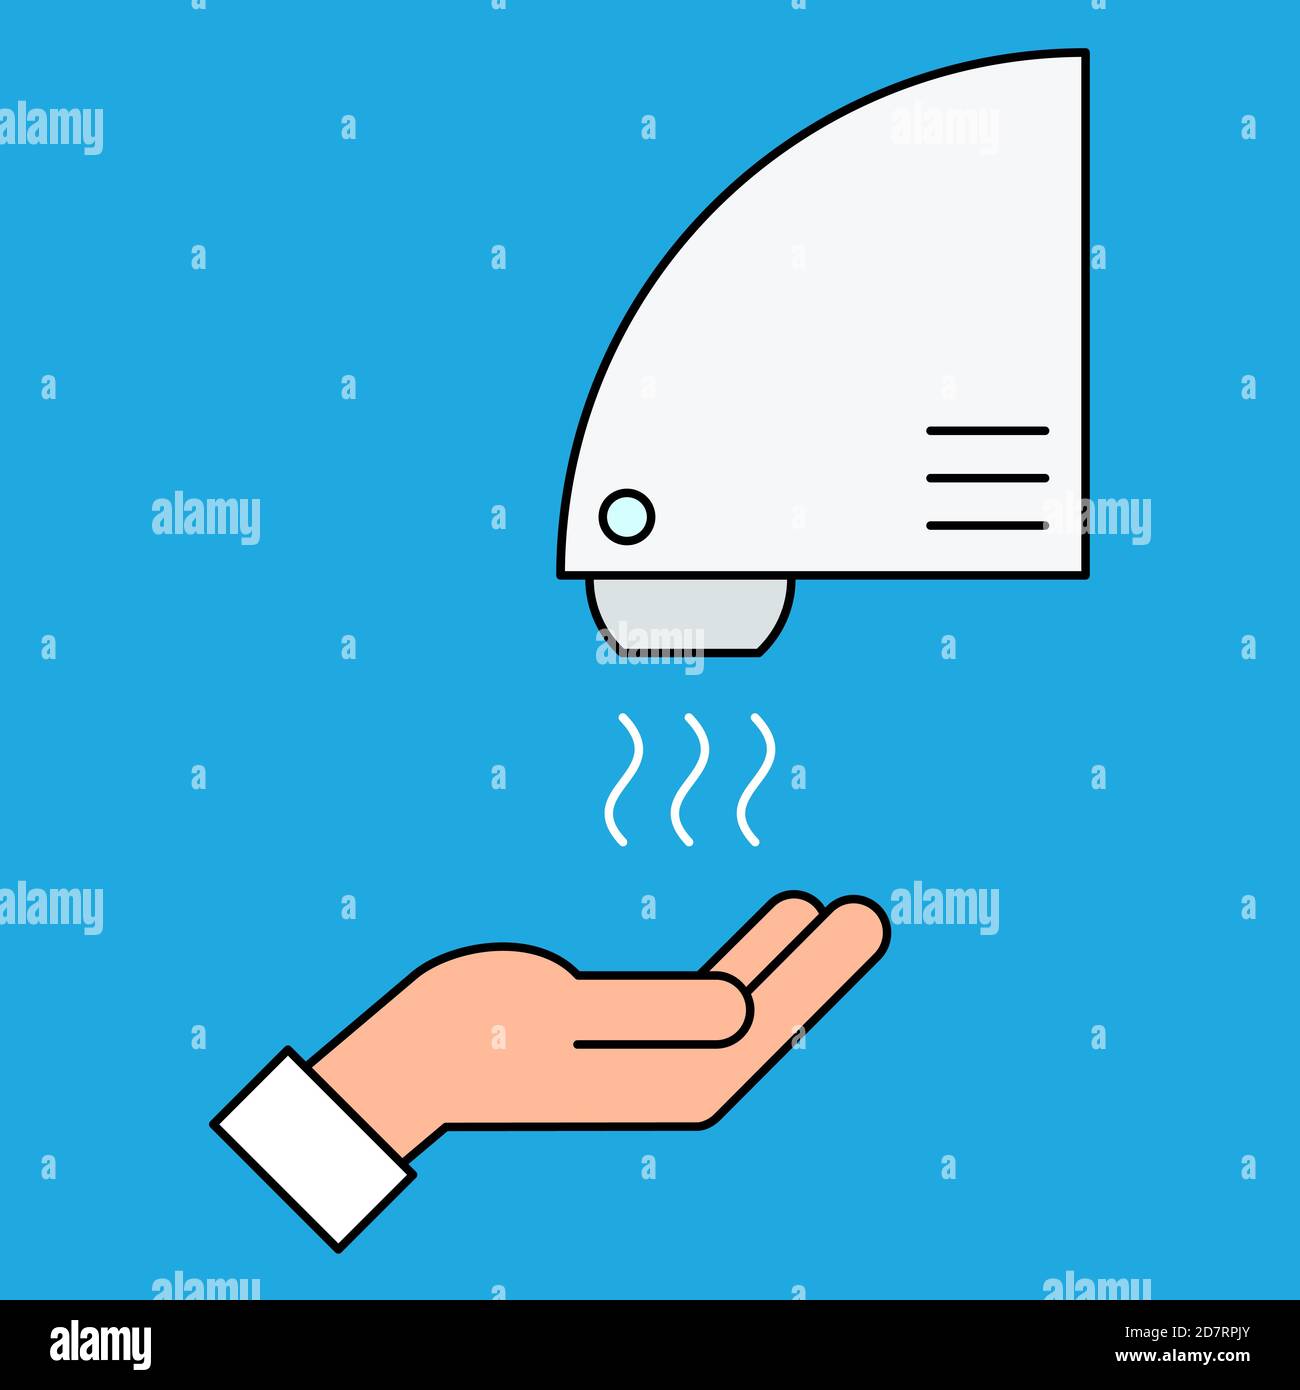 Automatic hand dryer machine with sensor. Hand dryer icon. Wash hands safely concept. No touch antivirus and antibacterial protection. Vector, flat. Stock Vector